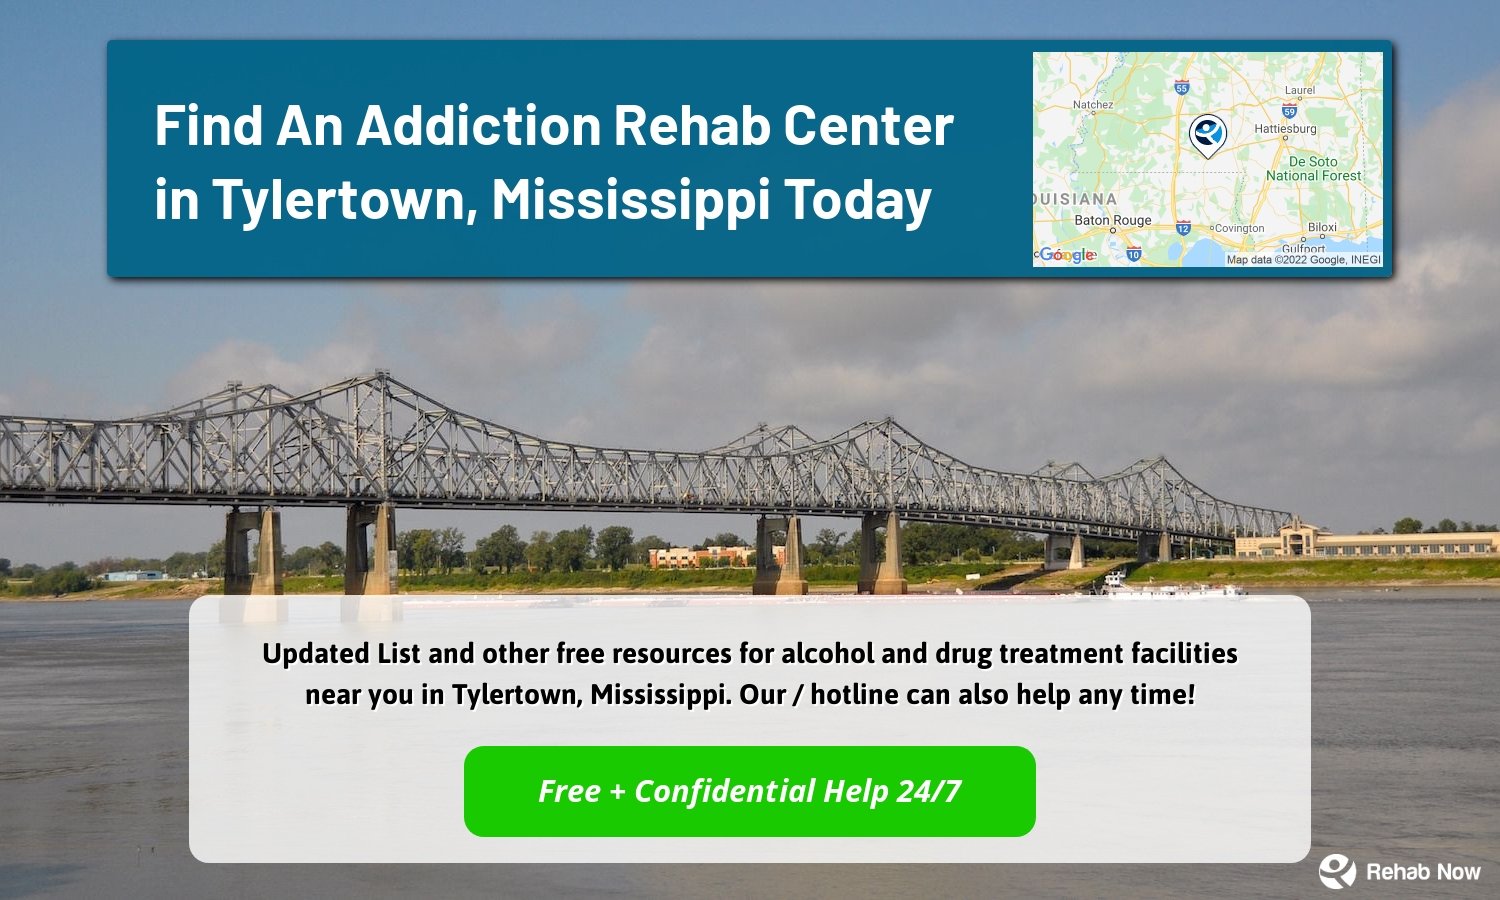  Updated List and other free resources for alcohol and drug treatment facilities near you in Tylertown, Mississippi. Our / hotline can also help any time!